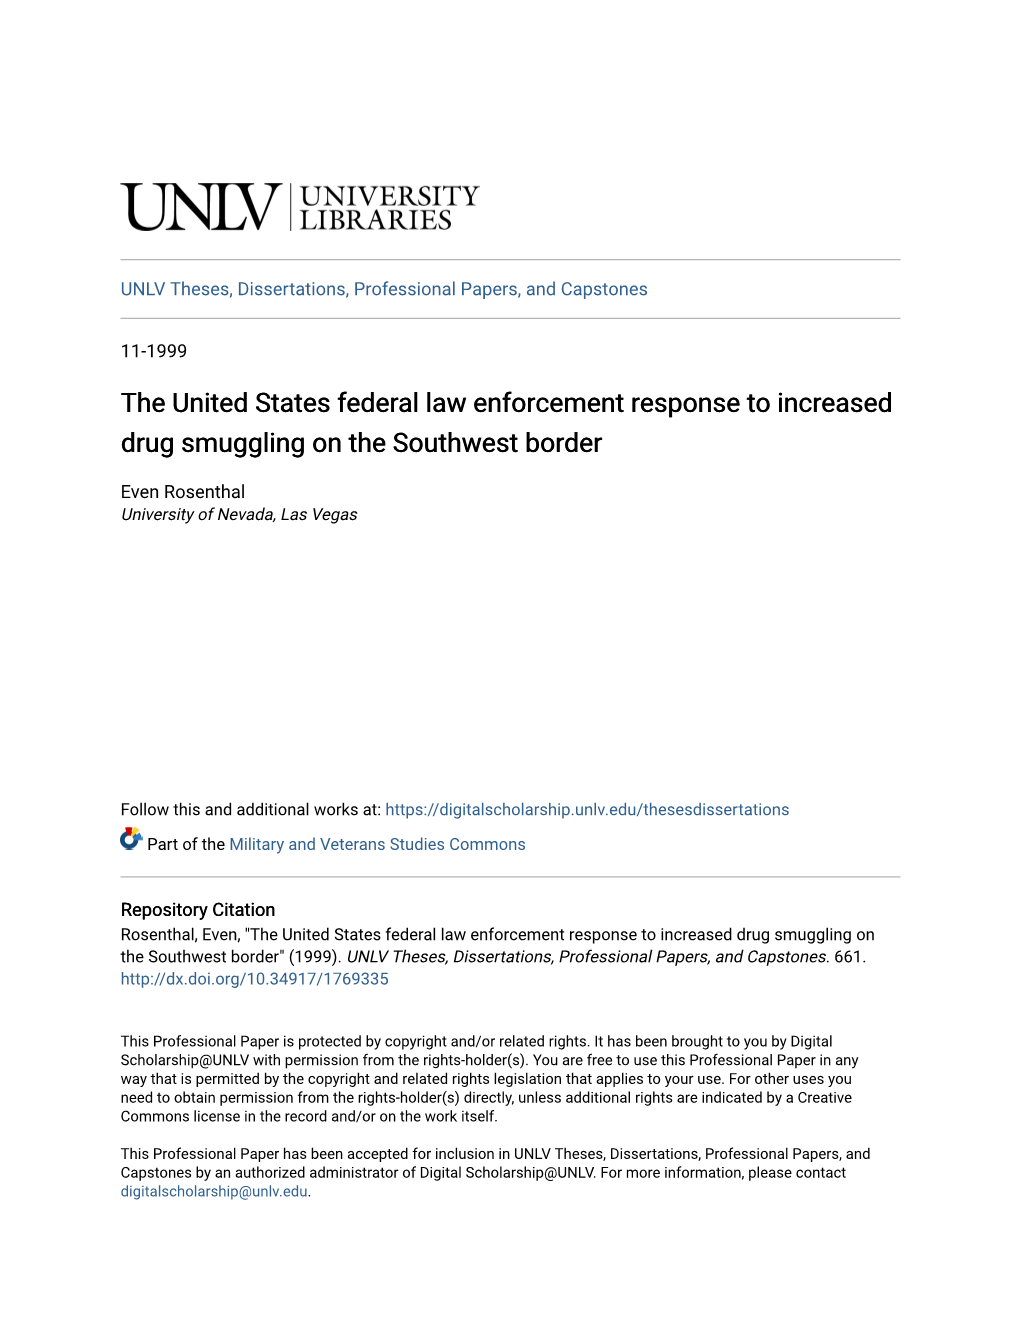 The United States Federal Law Enforcement Response to Increased Drug Smuggling on the Southwest Border